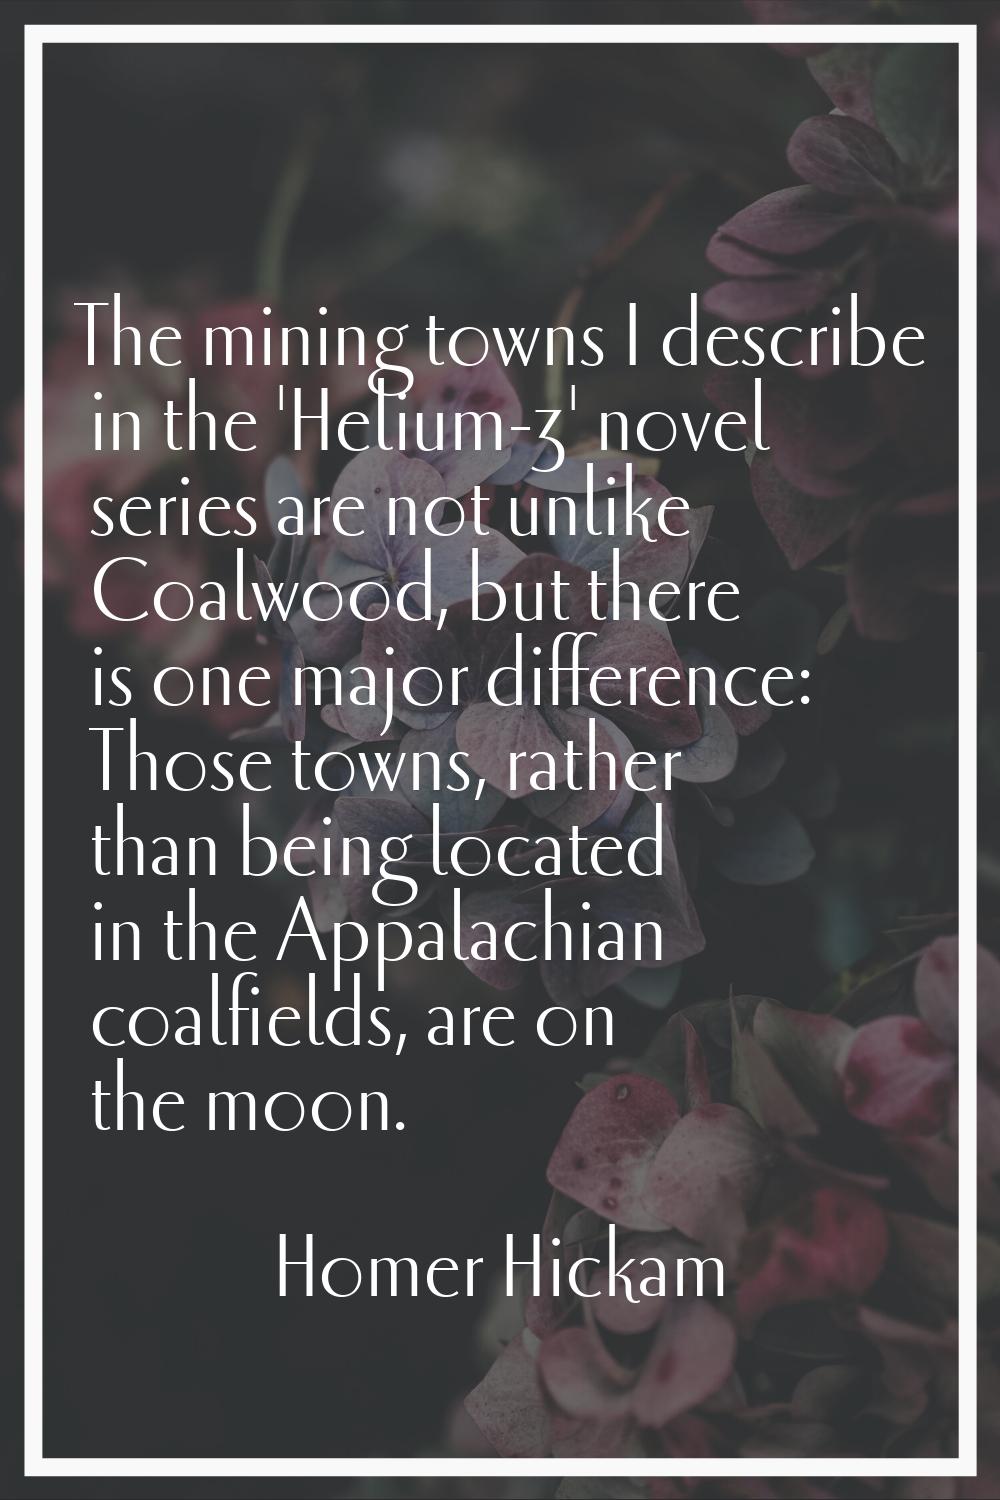 The mining towns I describe in the 'Helium-3' novel series are not unlike Coalwood, but there is on